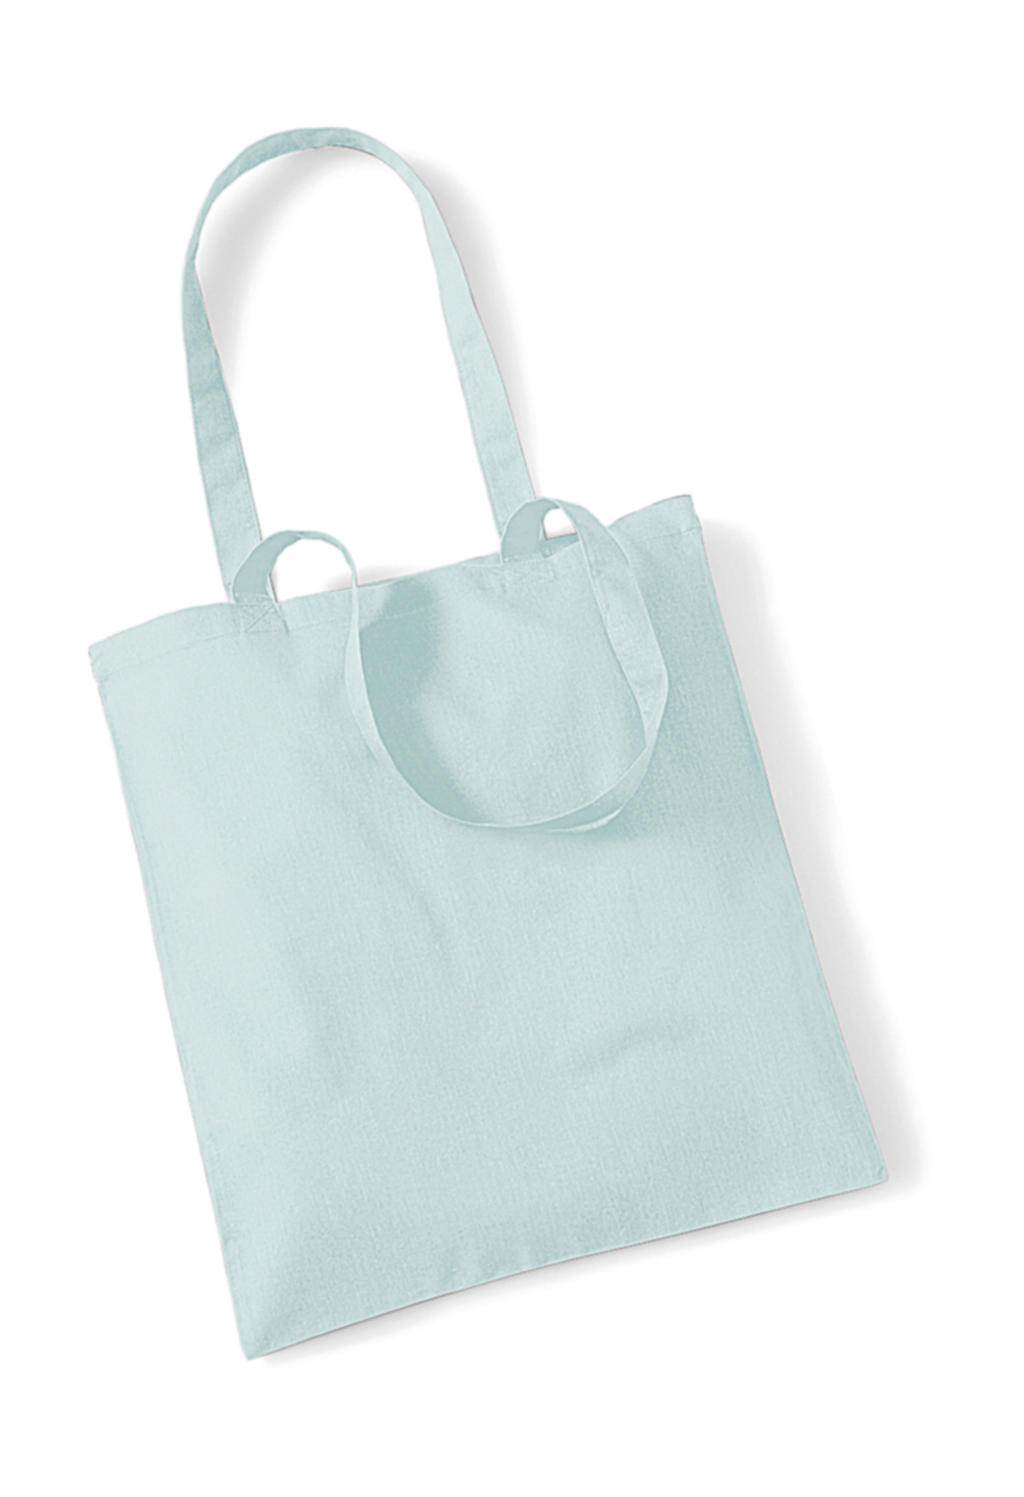  Bag for Life - Long Handles in Farbe Pastel Mint